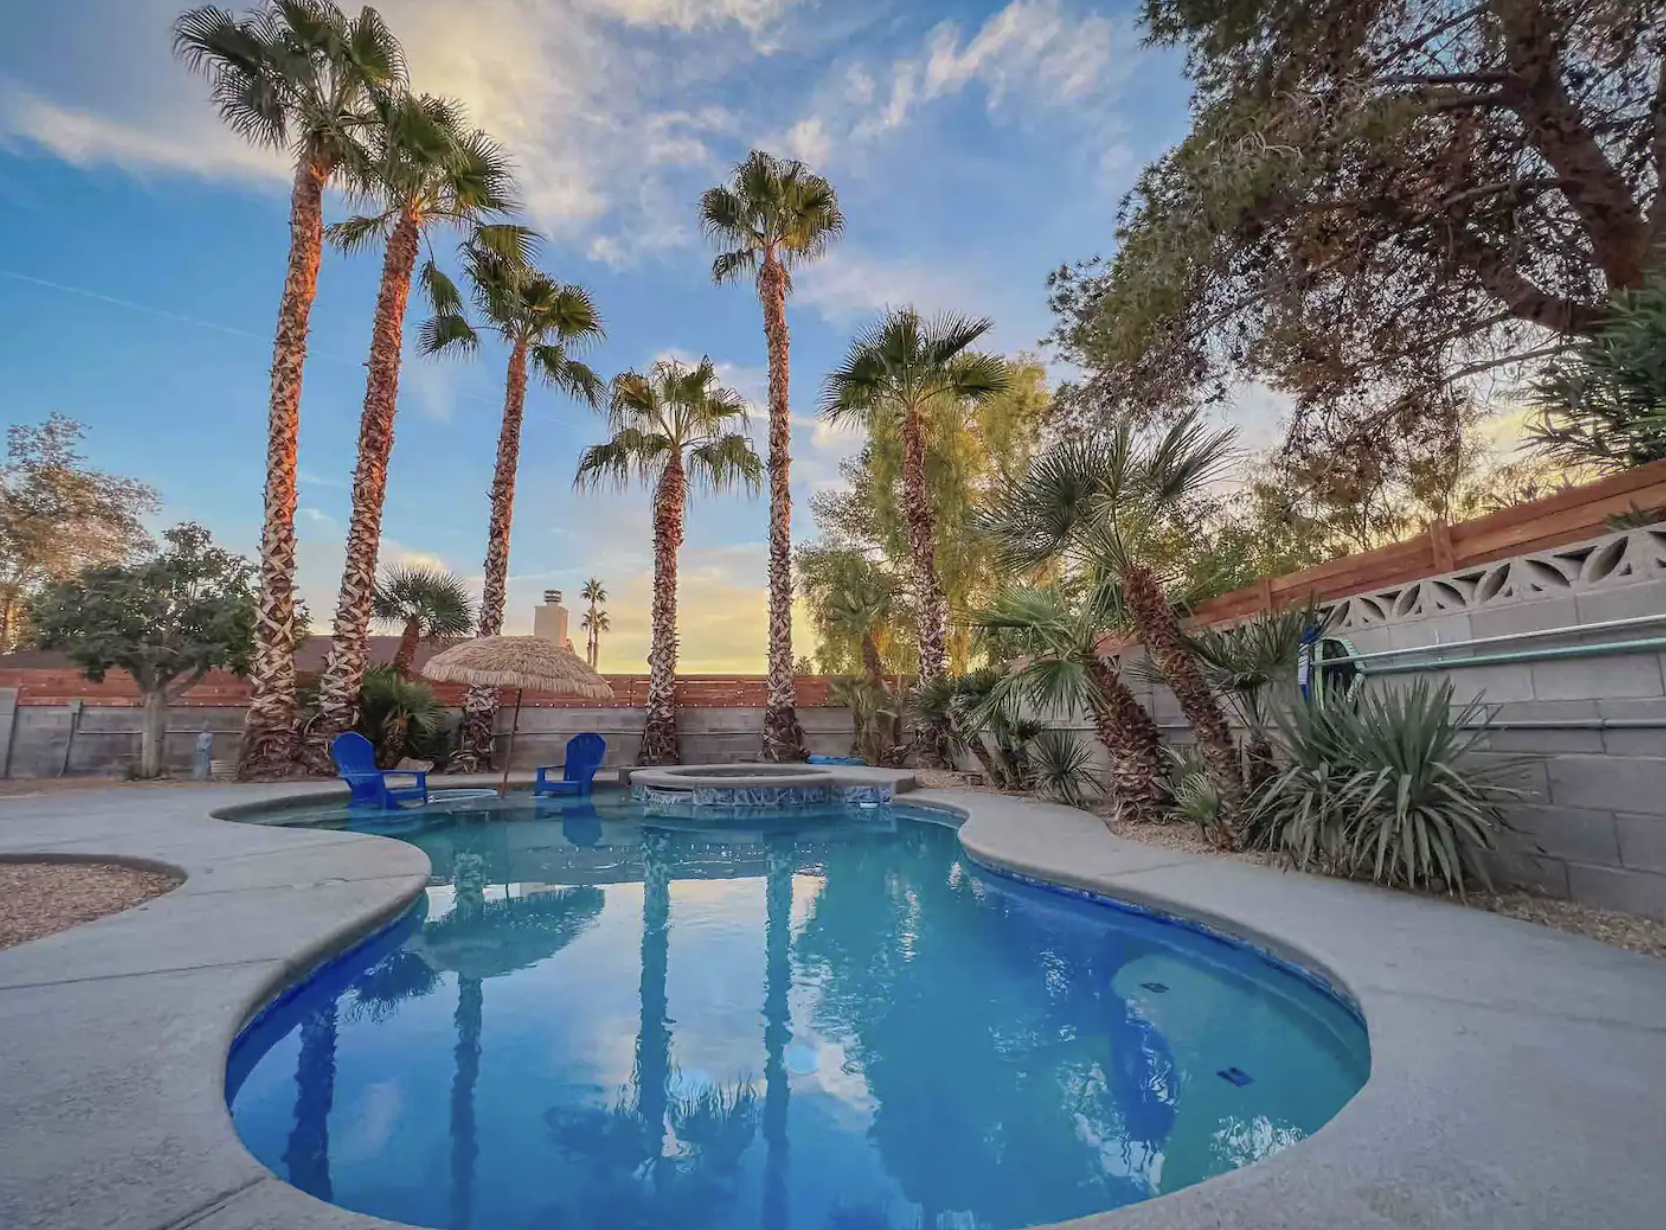 Make a Splash in These Top 5 Las Vegas Pools This Summer